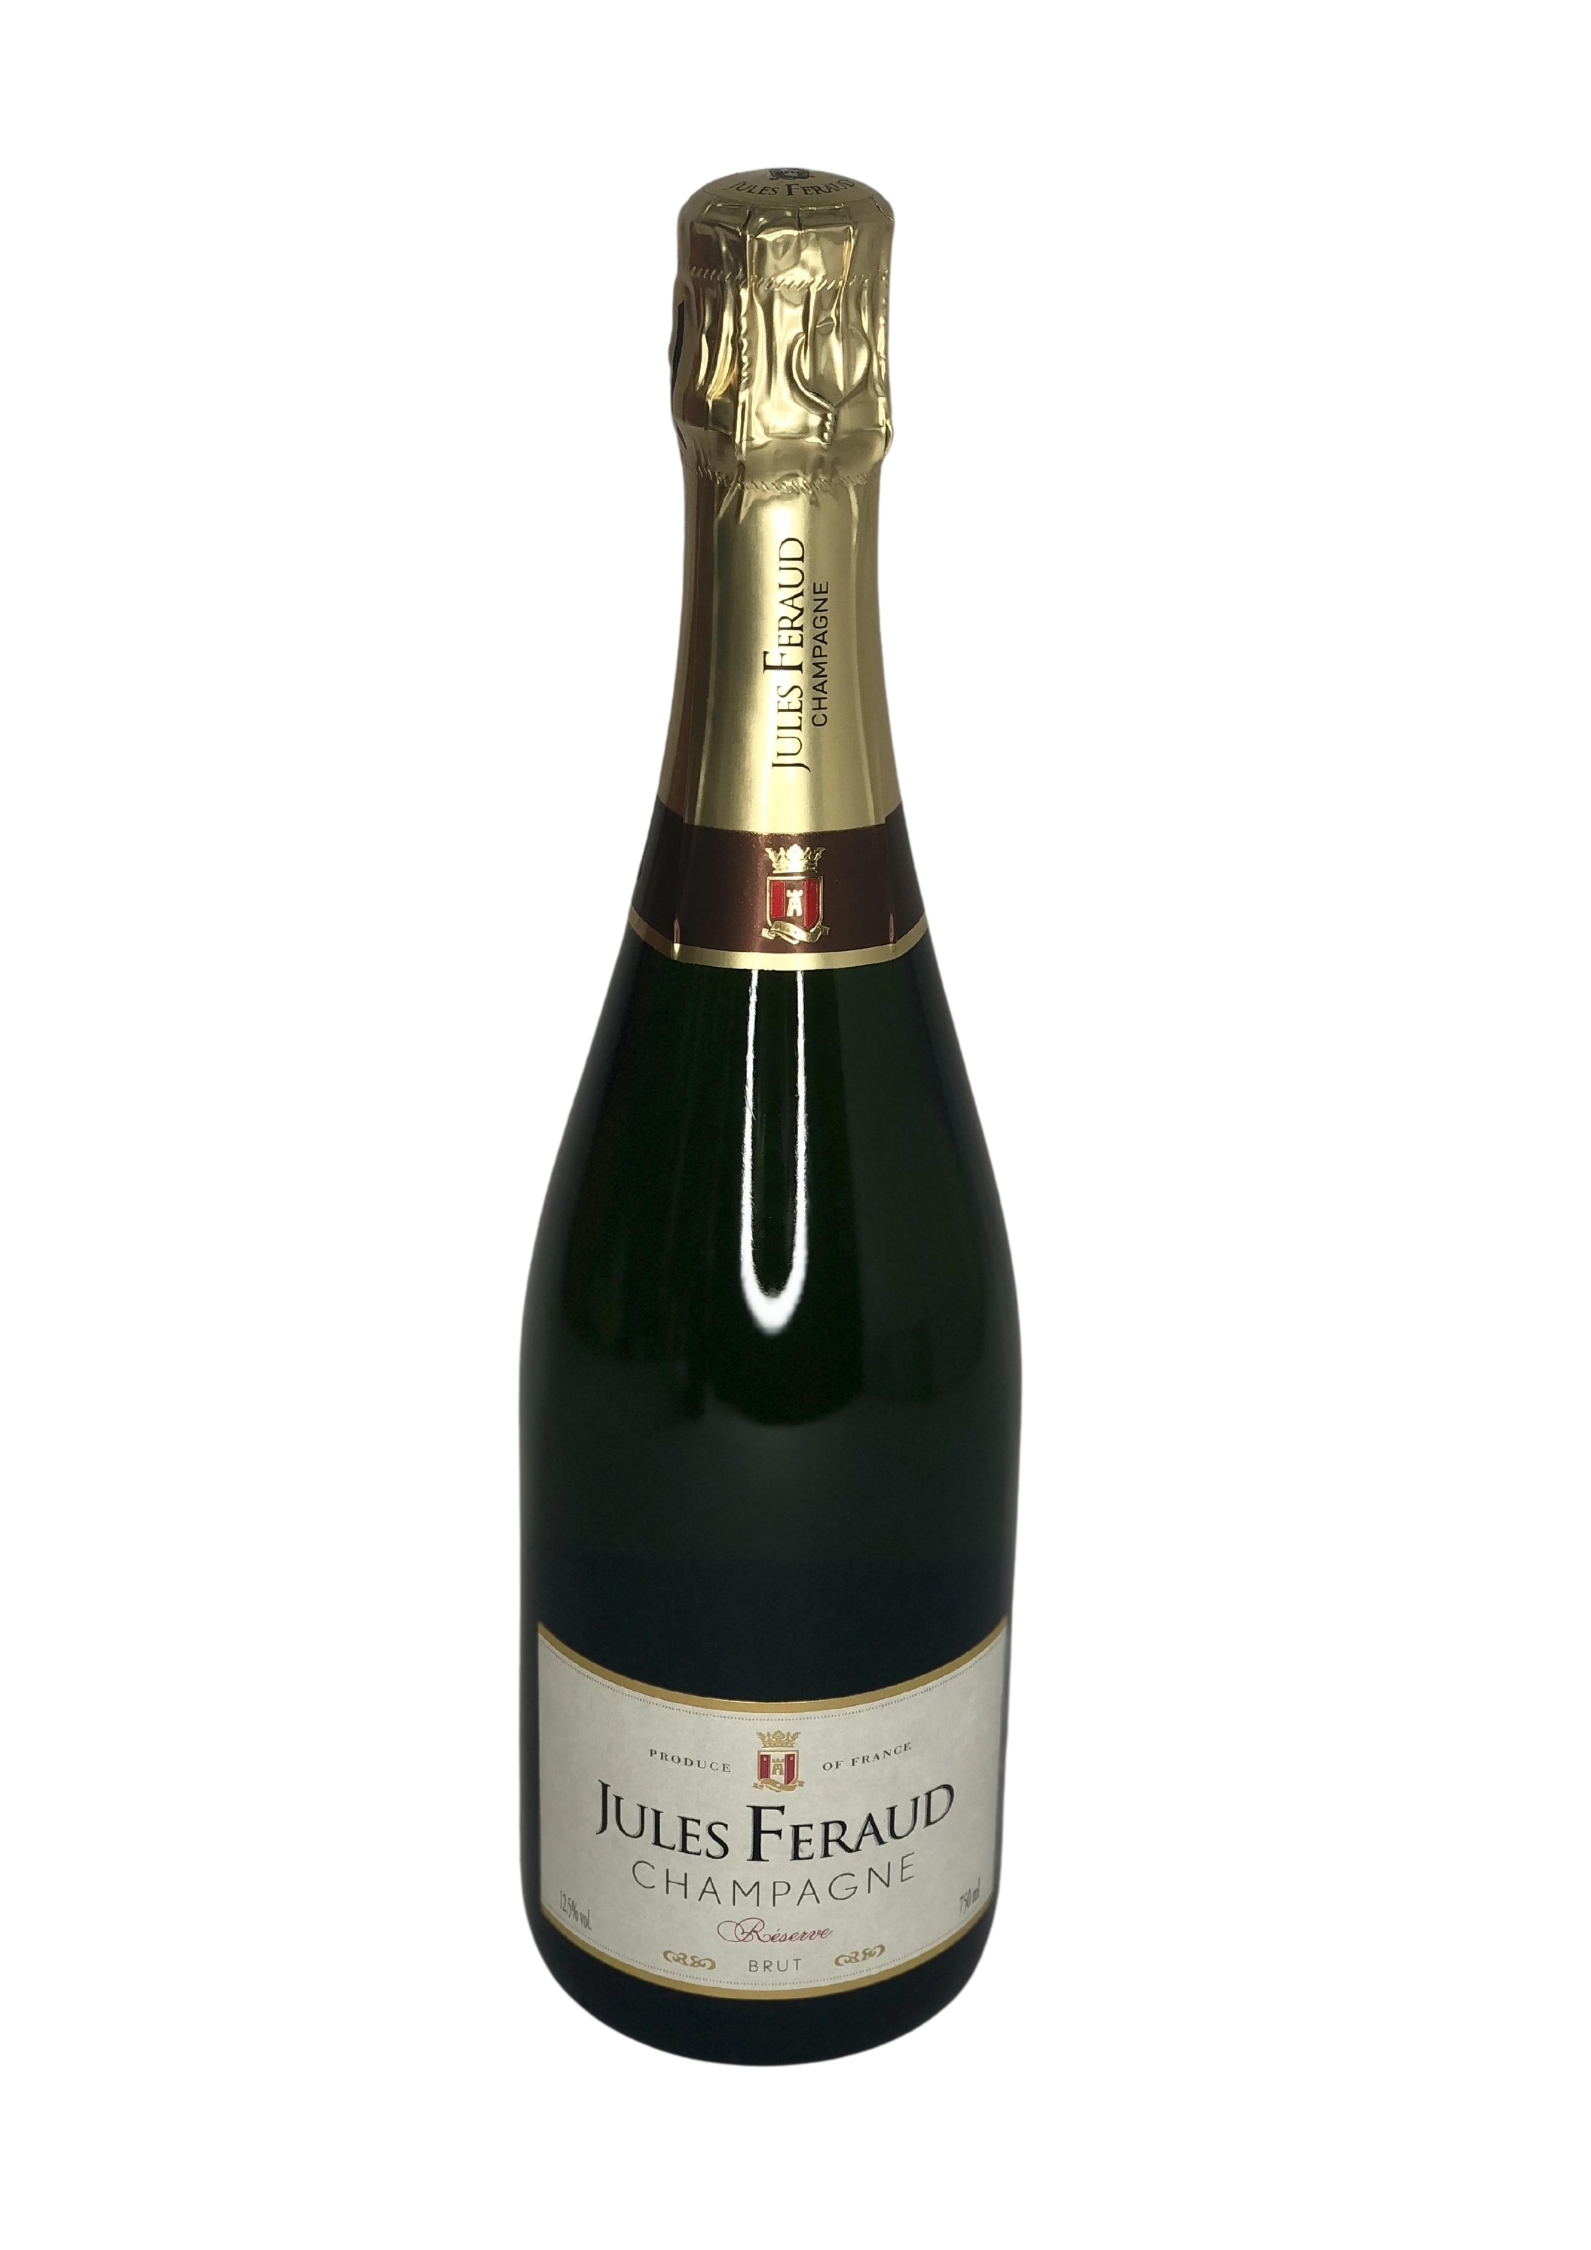 <h2>Bottle of Champagne</h2>
<br>
<ul>
<li>75cl Bottle of Jules Feraud Champagne - 12.5%</li>
<li>Beautifully presented in Gift Bag</li>
<li>Attach your own personal message</li>
<li>This product contains alcohol and as such should only be bought for someone over the age of 18</li>
<li>For delivery area coverage see below</li>
</ul>
<br>
<h2>Gift Delivery Coverage</h2>
<p>Our shop delivers flowers and gifts to the following Liverpool postcodes L1 L2 L3 L4 L5 L6 L7 L8 L11 L12 L13 L14 L15 L16 L17 L18 L19 L24 L25 L26 L27 L36 L70 If your order is for an area outside of these we can organise delivery for you through our network of florists. We will ask them to make as close as possible to the image but because of the difference in stock and sundry items, it may not be exact.</p>
<br>
<h2>Alcohol Gifts</h2>
<p>As a licenced florist we are able to supply alcoholic drinks either as a gift on their own or with flowers. We have carefully selected a range that we know you will love either as a gift in itself or to provide that extra bit of celebratory luxury to a floral gift.</p>
<p>This Jules Feraud Champagne will bring an extra sparkle to the celebrations.</p>
<p>It is a flavorsome champagne with a nut and crumble palate fresh acidity and a long length not to mention the appealing nose of caramel and buttered toast grilled nuts and pistachio. Delicious!</p>
<p>This is a lovely addition to your bouquet of flowers to celebrate a special occasion.</p>
<br>
<h2>Online Gift Ordering | Online Gift Delivery</h2>
<p>Through this website you can order 24 hours, Booker Gifts and Gifts Liverpool have put together this carefully selected range of Flowers, Gifts and Finishing Touches to make Gift ordering as easy as possible. This means even if you do not live in Liverpool we make it easy for you to see what you are getting when buying for delivery in Liverpool.</p>
<br>
<h2>Liverpool Flower and Gift Delivery</h2>
<p>We are open 7 days a week and offer advanced booking flower delivery, same-day flower delivery, Guaranteed AM Flower Delivery and also offer Sunday Flower Delivery.</p>
<p>Our florists Deliver in Liverpool and can provide flowers for you in Liverpool, Merseyside. And through our network of florists can organise flower deliveries for you nationwide.</p>
<br>
<h2>Beautiful Gifts Delivered | Best Florist in Liverpool</h2>
<p>Having been nominated the Best Florist in Liverpool by the independent Three Best Rated for the 5th year running you can feel secure with us</p>
<p>You can trust Booker Gifts and Gifts to deliver the very best for you.</p>
<br>
<h2>5 Star Google Review</h2>
<p><em>So Pleased with the product and service received. I am working away currently, so ordered online, and after my own misunderstanding with online payment, I contacted the florist directly to query. Gemma was very prompt and helpful, and my flowers were arranged easily. They arrived this morning and were as impactful as the pictures on the website, and the quality of the flowers and the arrangement were excellent. Great Work! David Welsh</em></p>
<br>